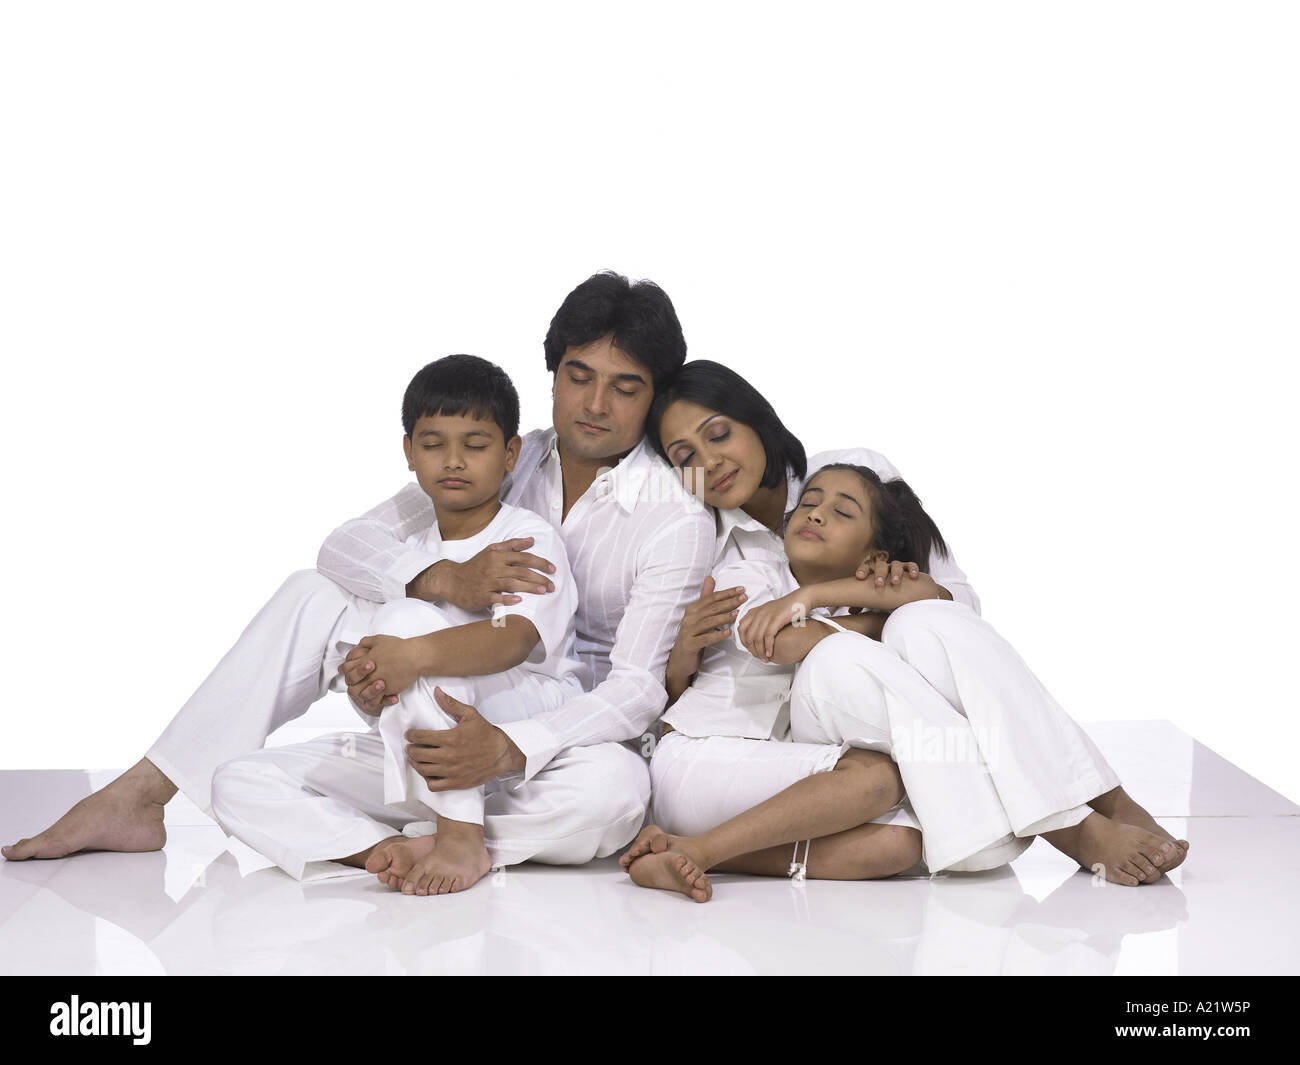 South Asian Indian Family With Father Mother Son And Daughter